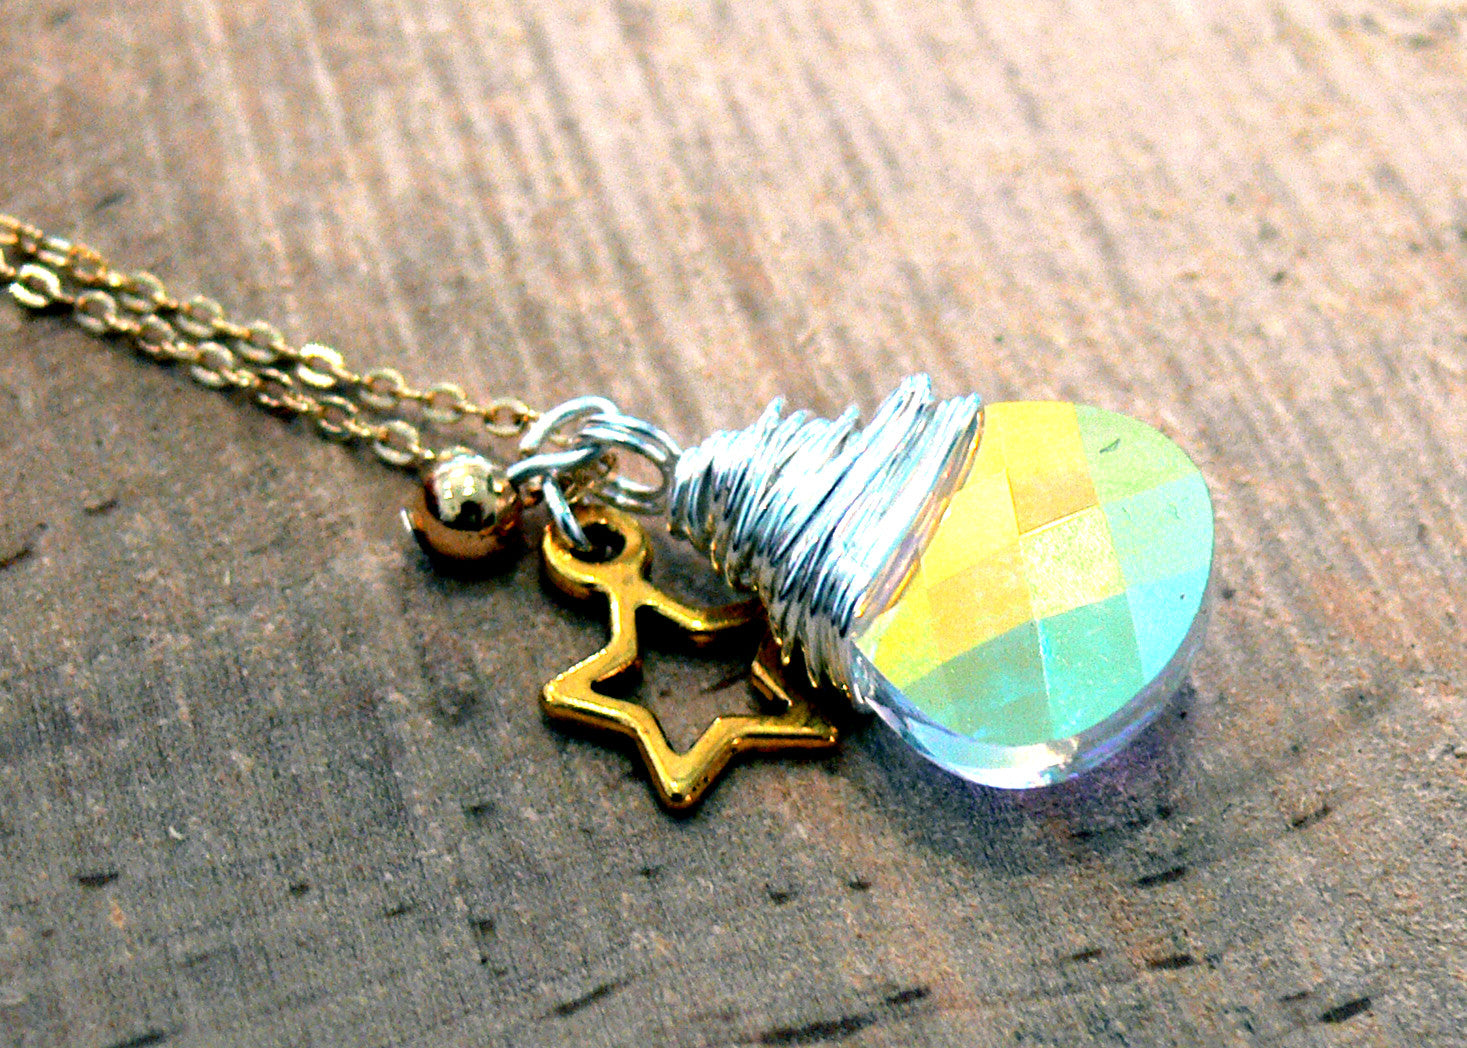 Crystal Wrapped Pendant